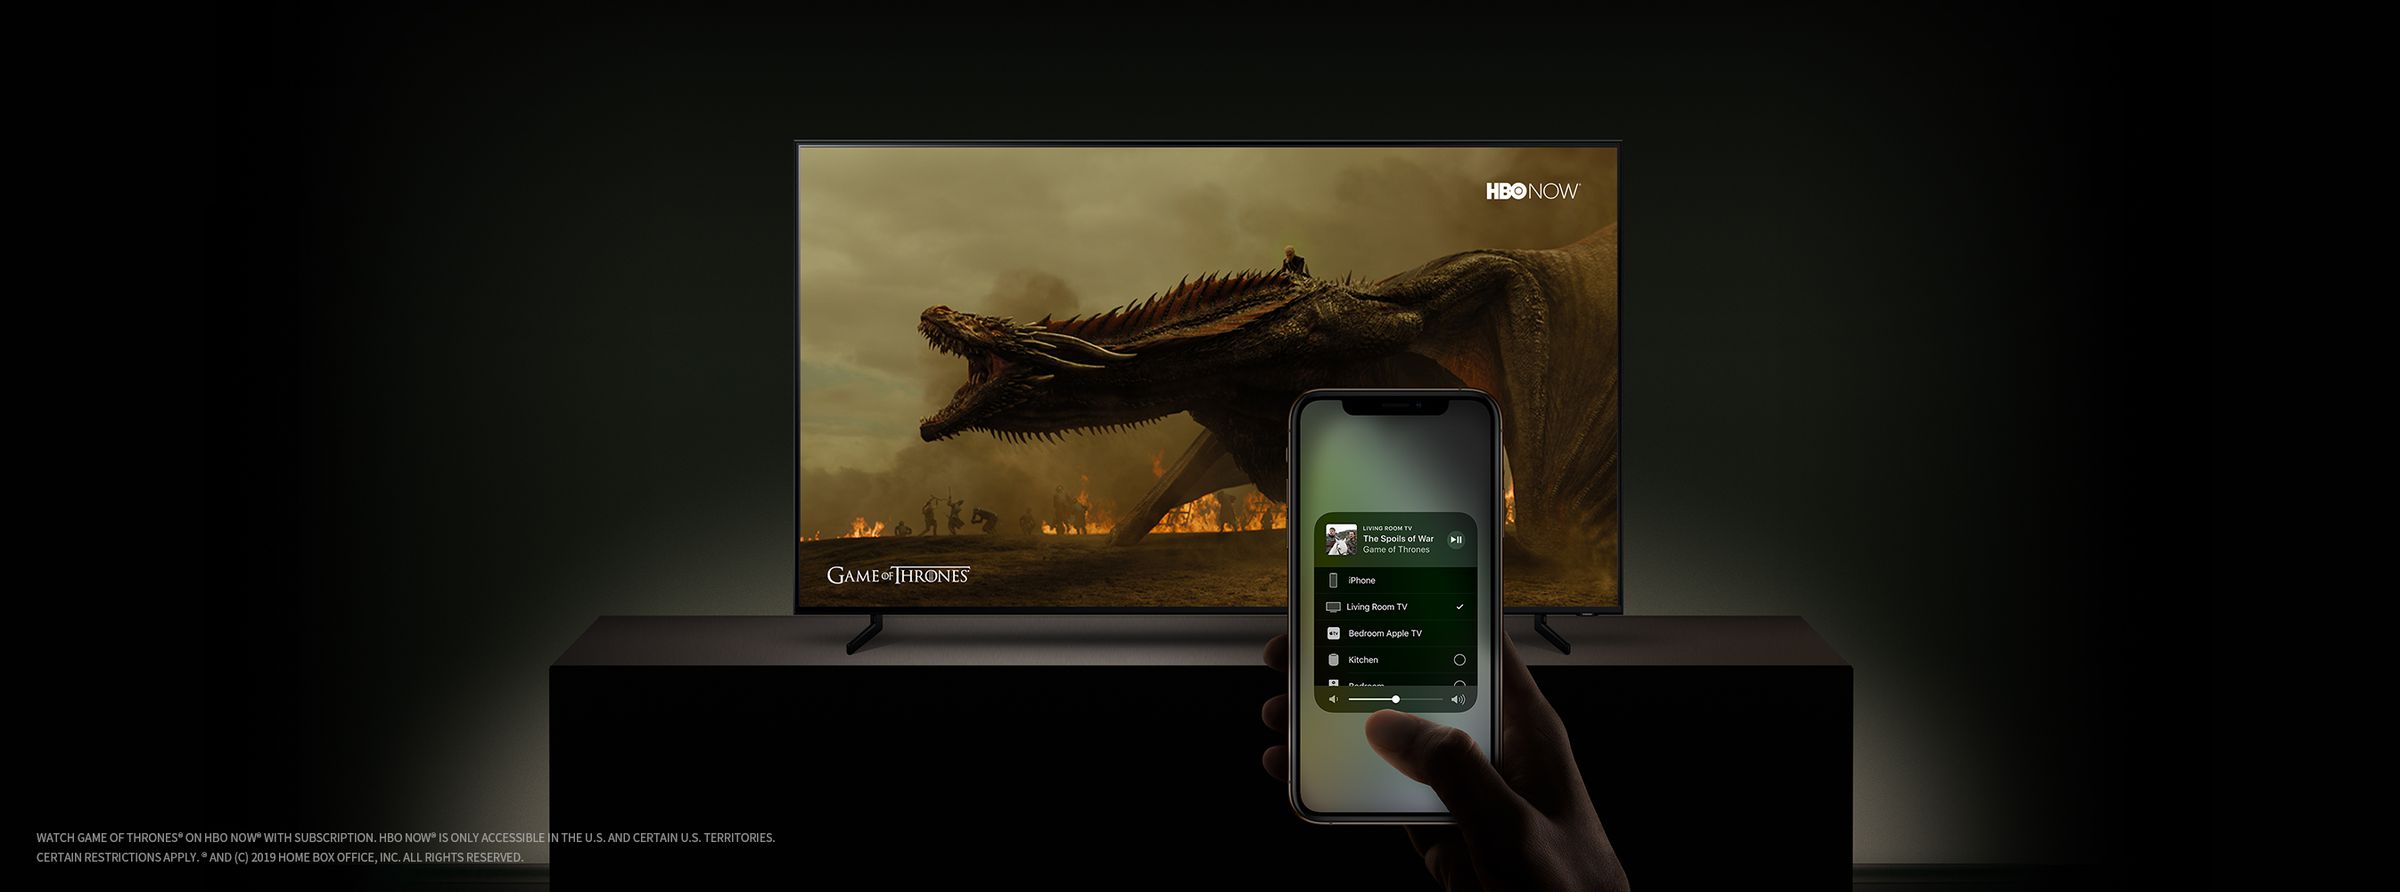 The TVs will also support AirPlay 2, which will allow content to be streamed from Apple devices. 